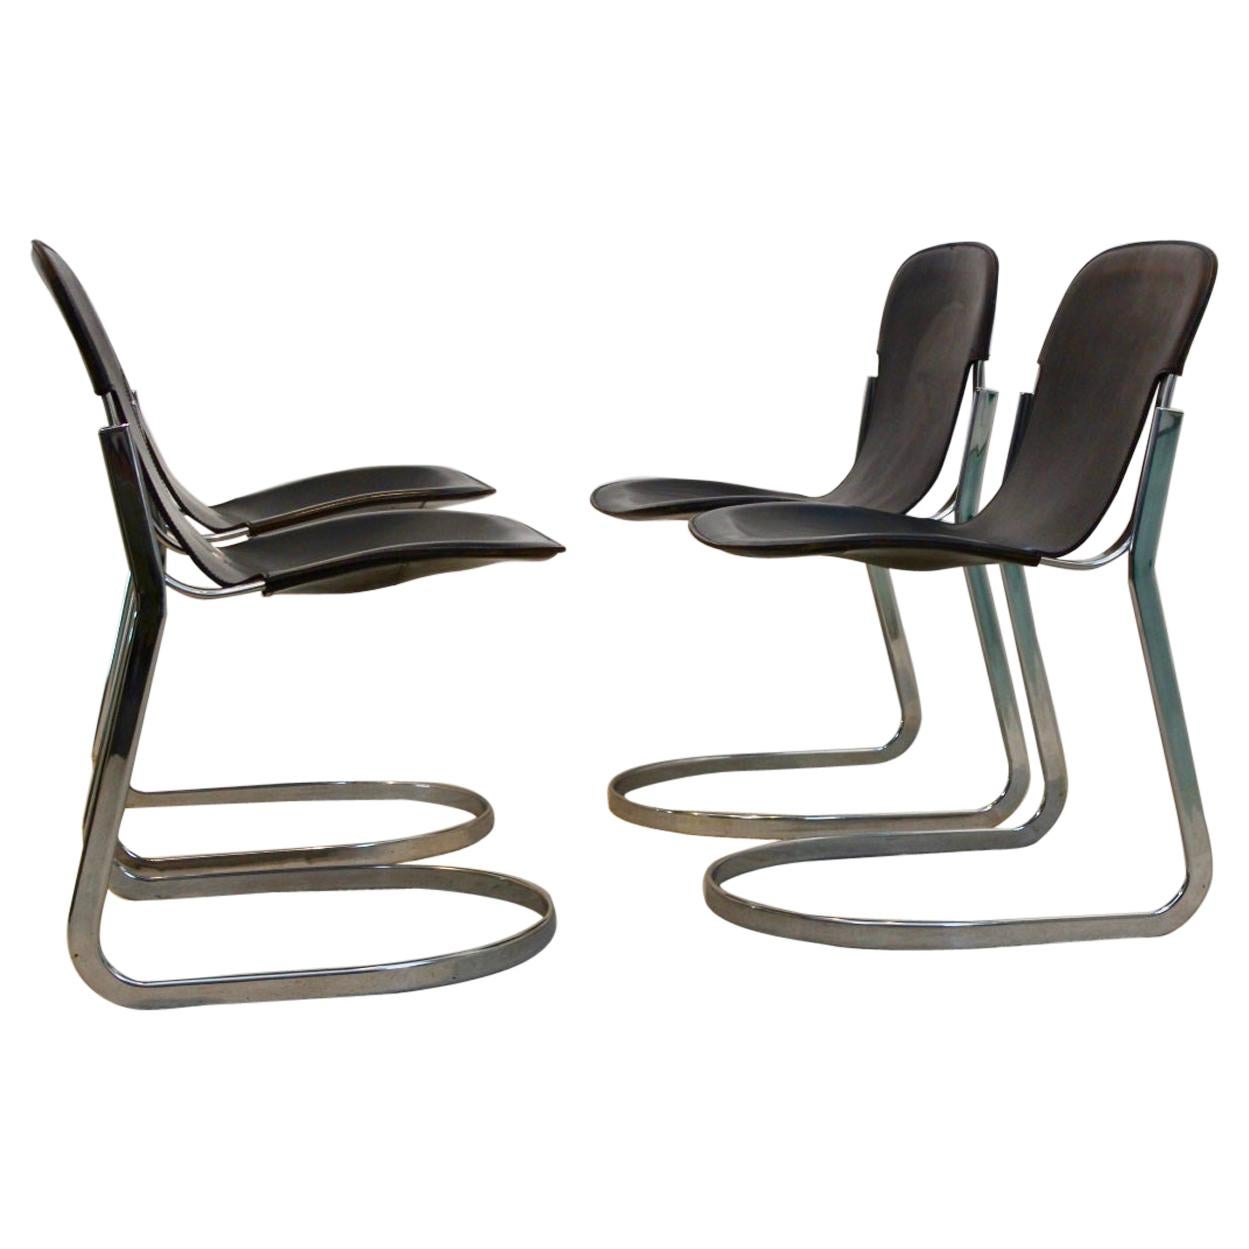 Set of Four Black Saddle Leather Dining Chairs by Willy Rizzo for Cidue, Italy